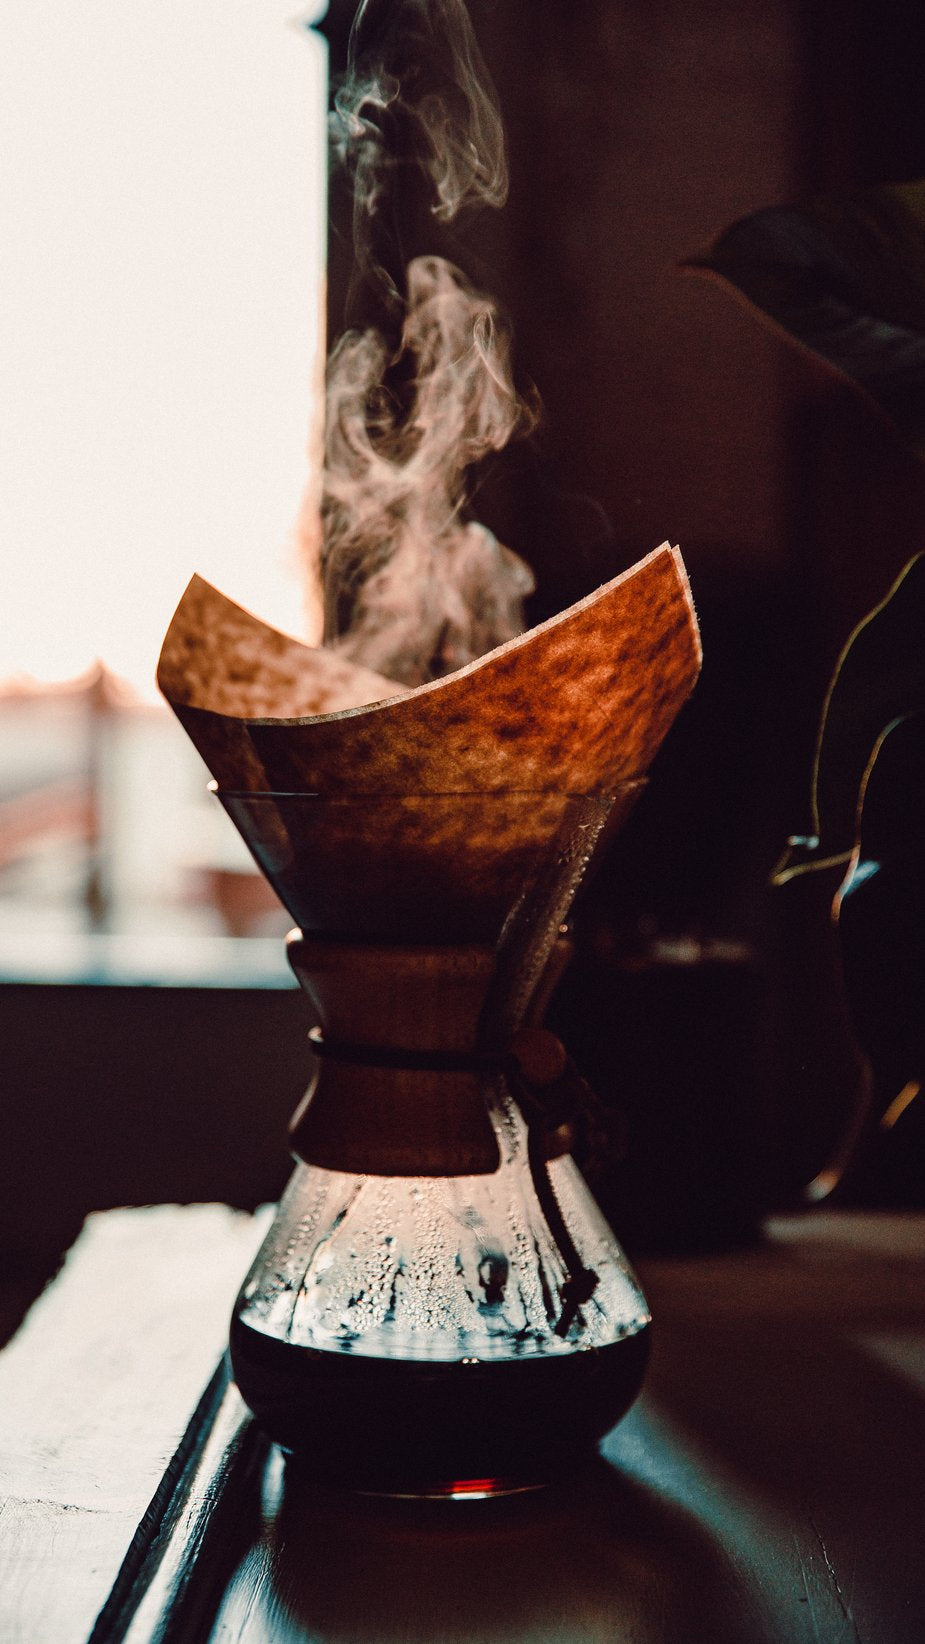 Coffee brewing in a Chemex-style pourover brewer.